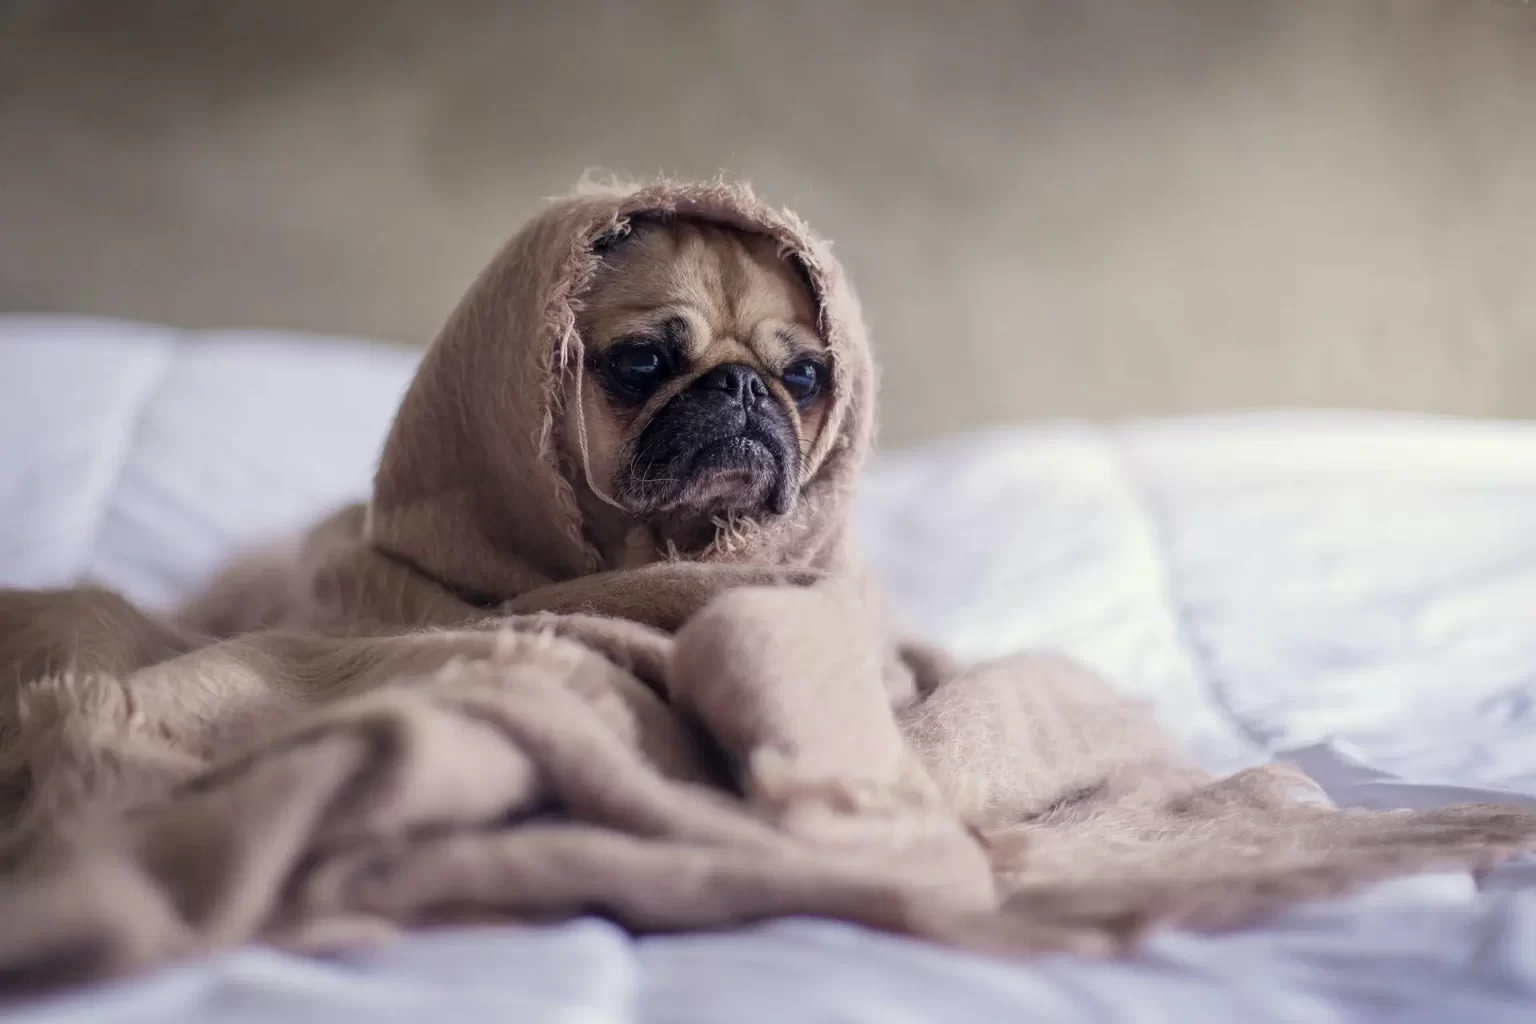 Pug dog sitting on a bed, wrapped in a blanket